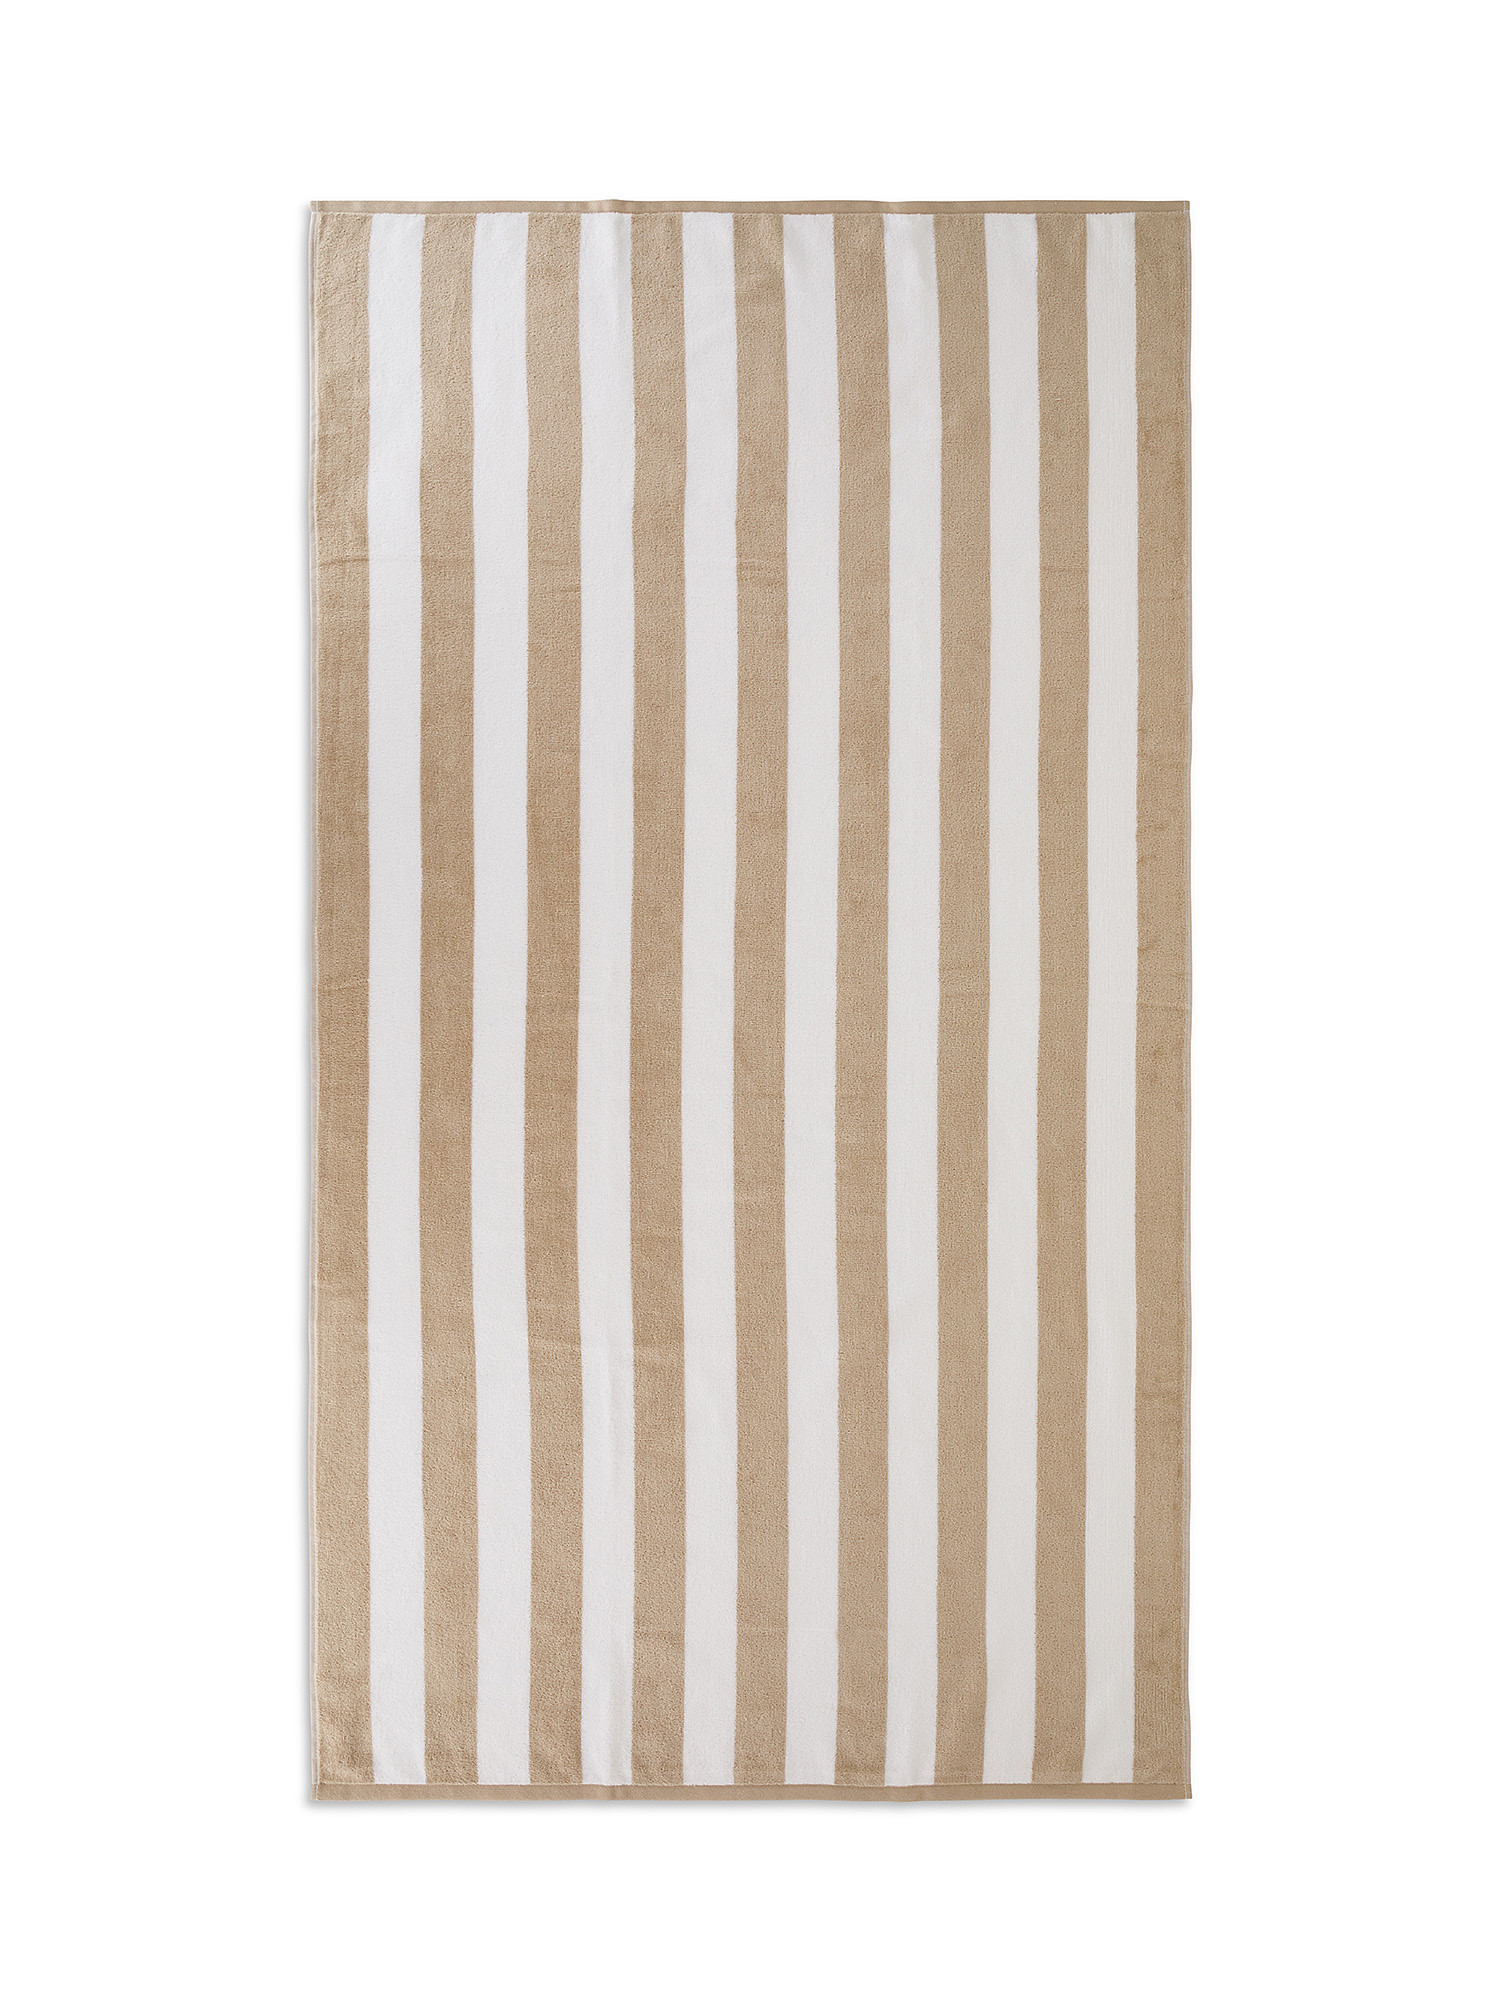 Cotton velor beach towel with striped pattern, Beige, large image number 0